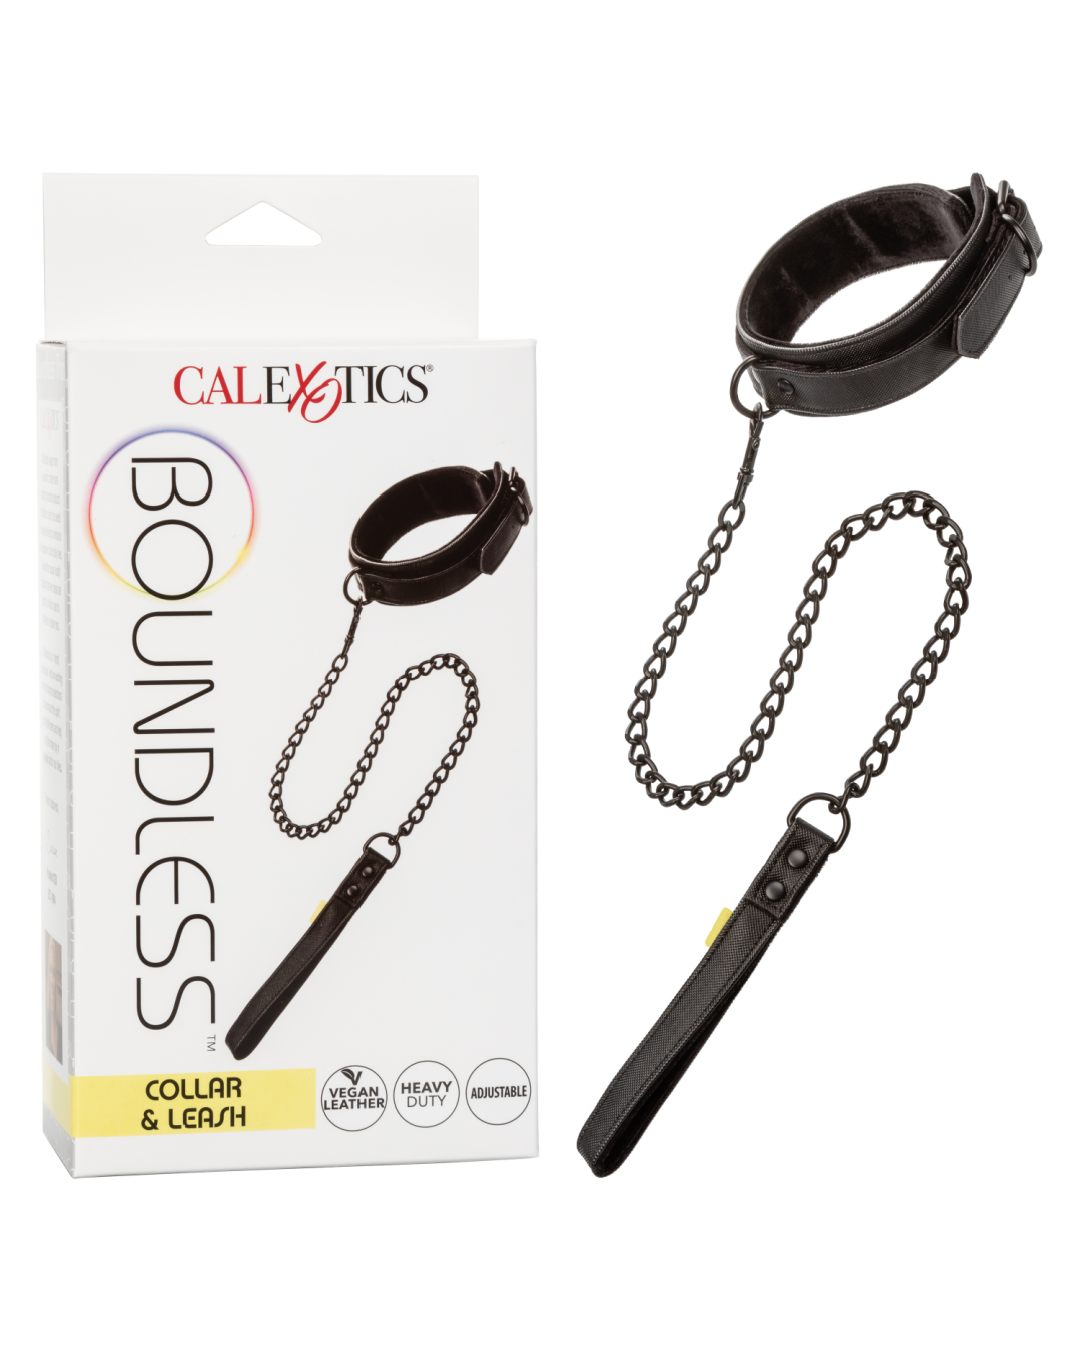 Boundless Collar and Leash Set by Calexotics  box and product on white background 